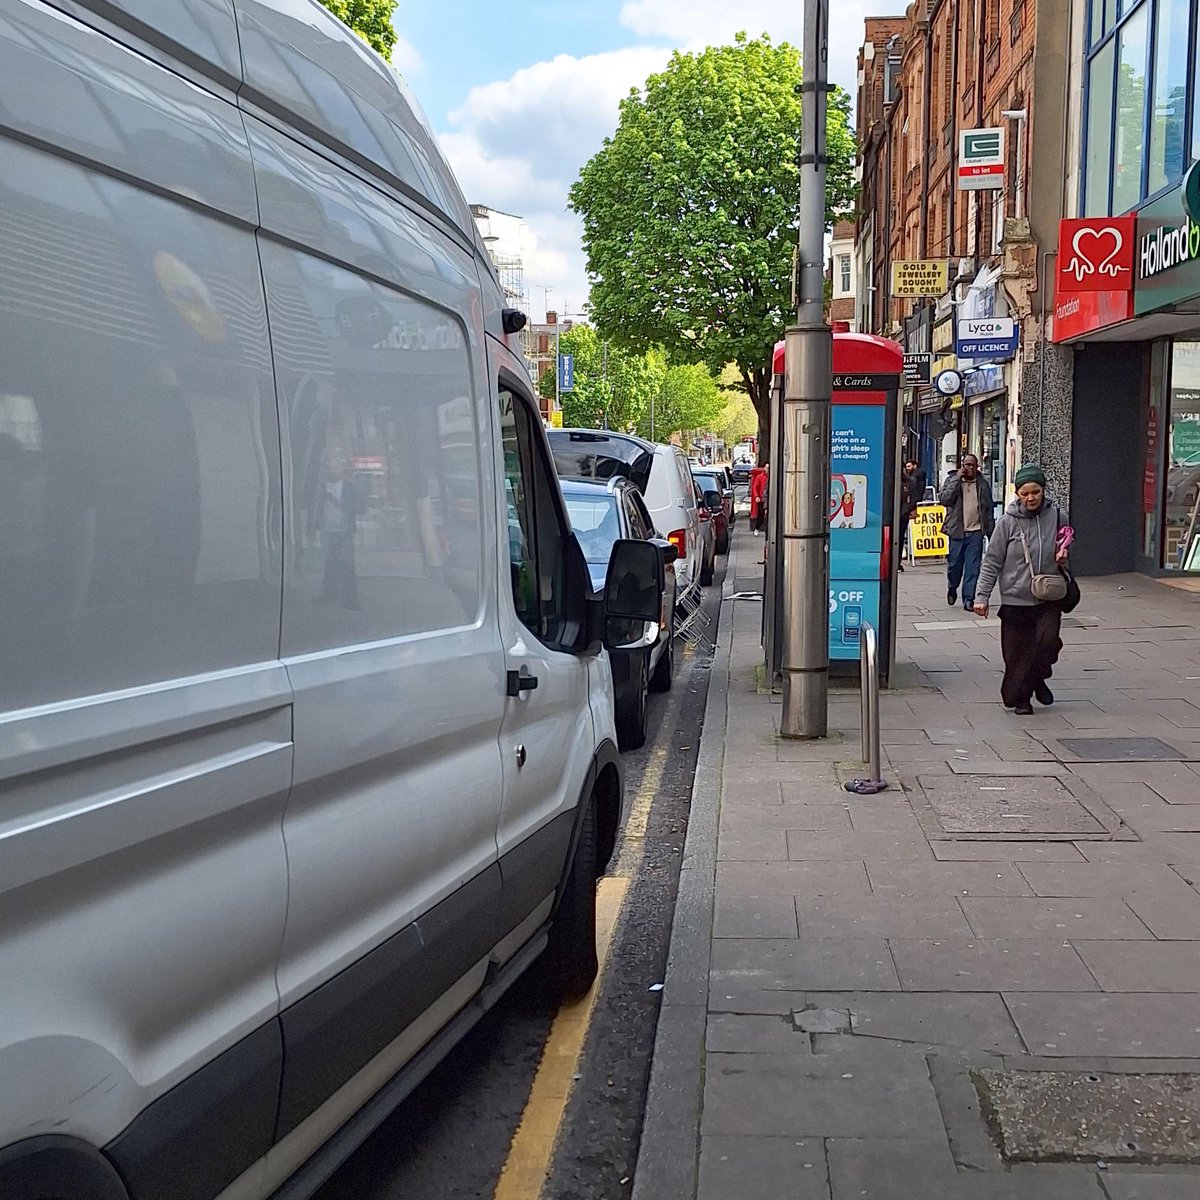 A few days later, more or less the same spot. Won't bother tagging ealing parking as they don't exist any more. Hello @EalingCustSer  can you get some enforcement down to Uxbridge Rd W Ealing, stretch around Lidl to Deans Gardens, full of illegally parked cars all day every day